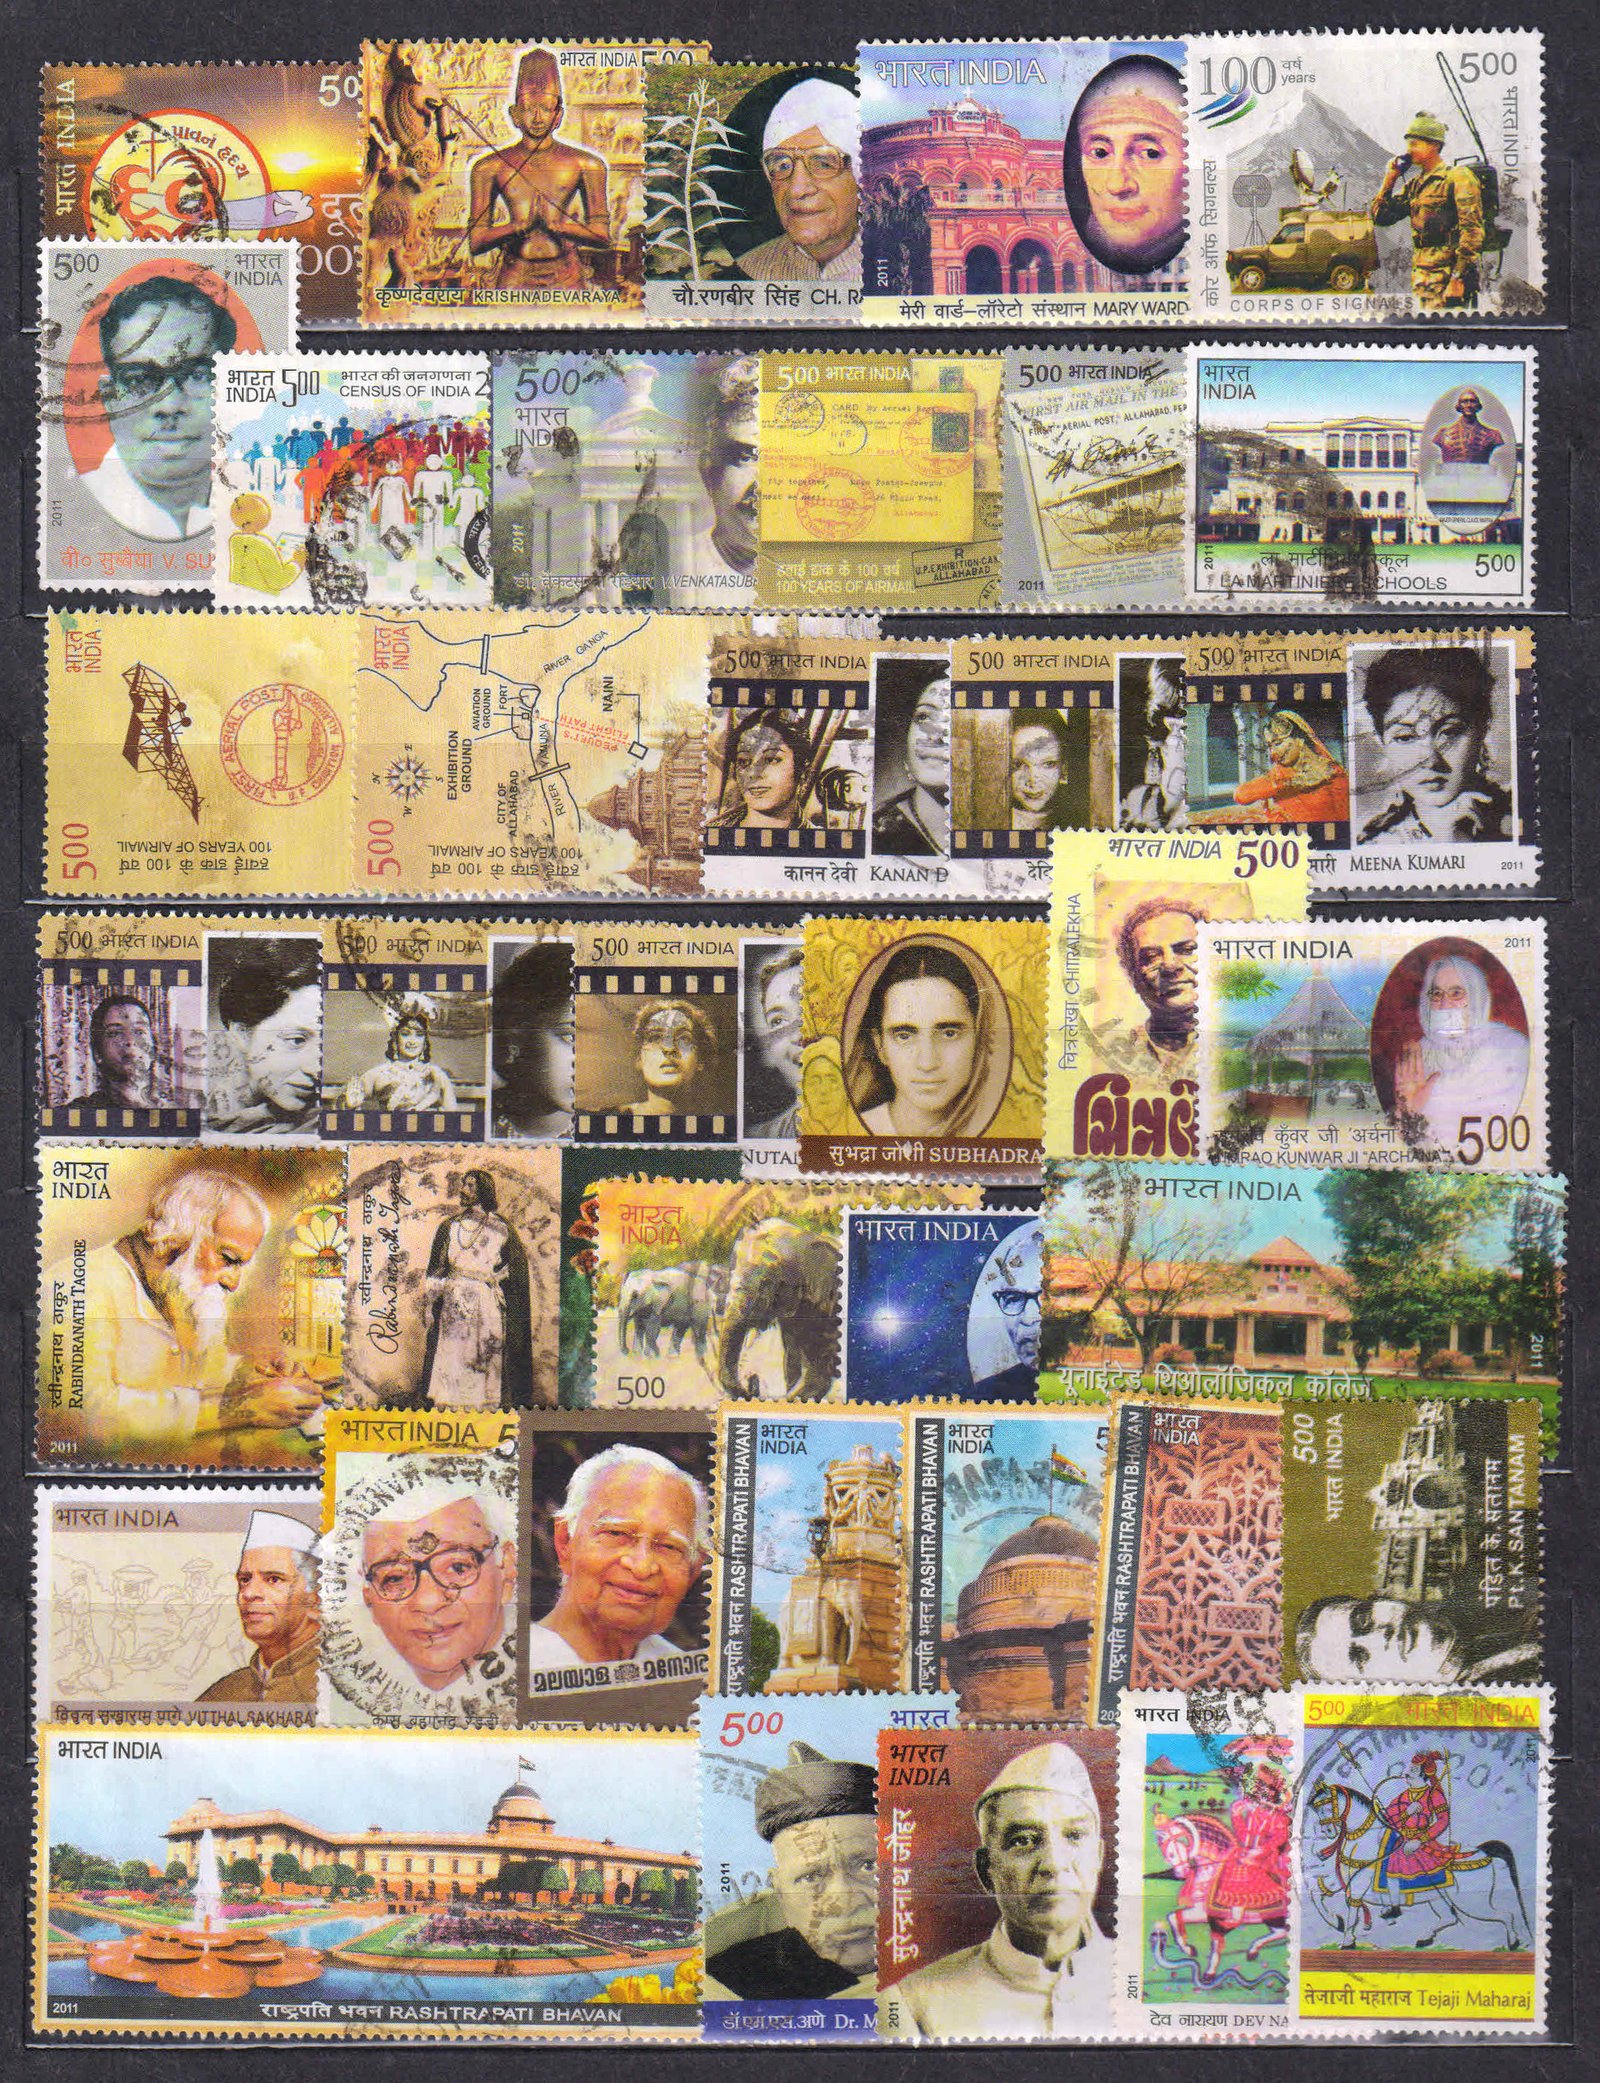 INDIA YEAR UNIT 2011-60 Different Used (Total Issued 62)